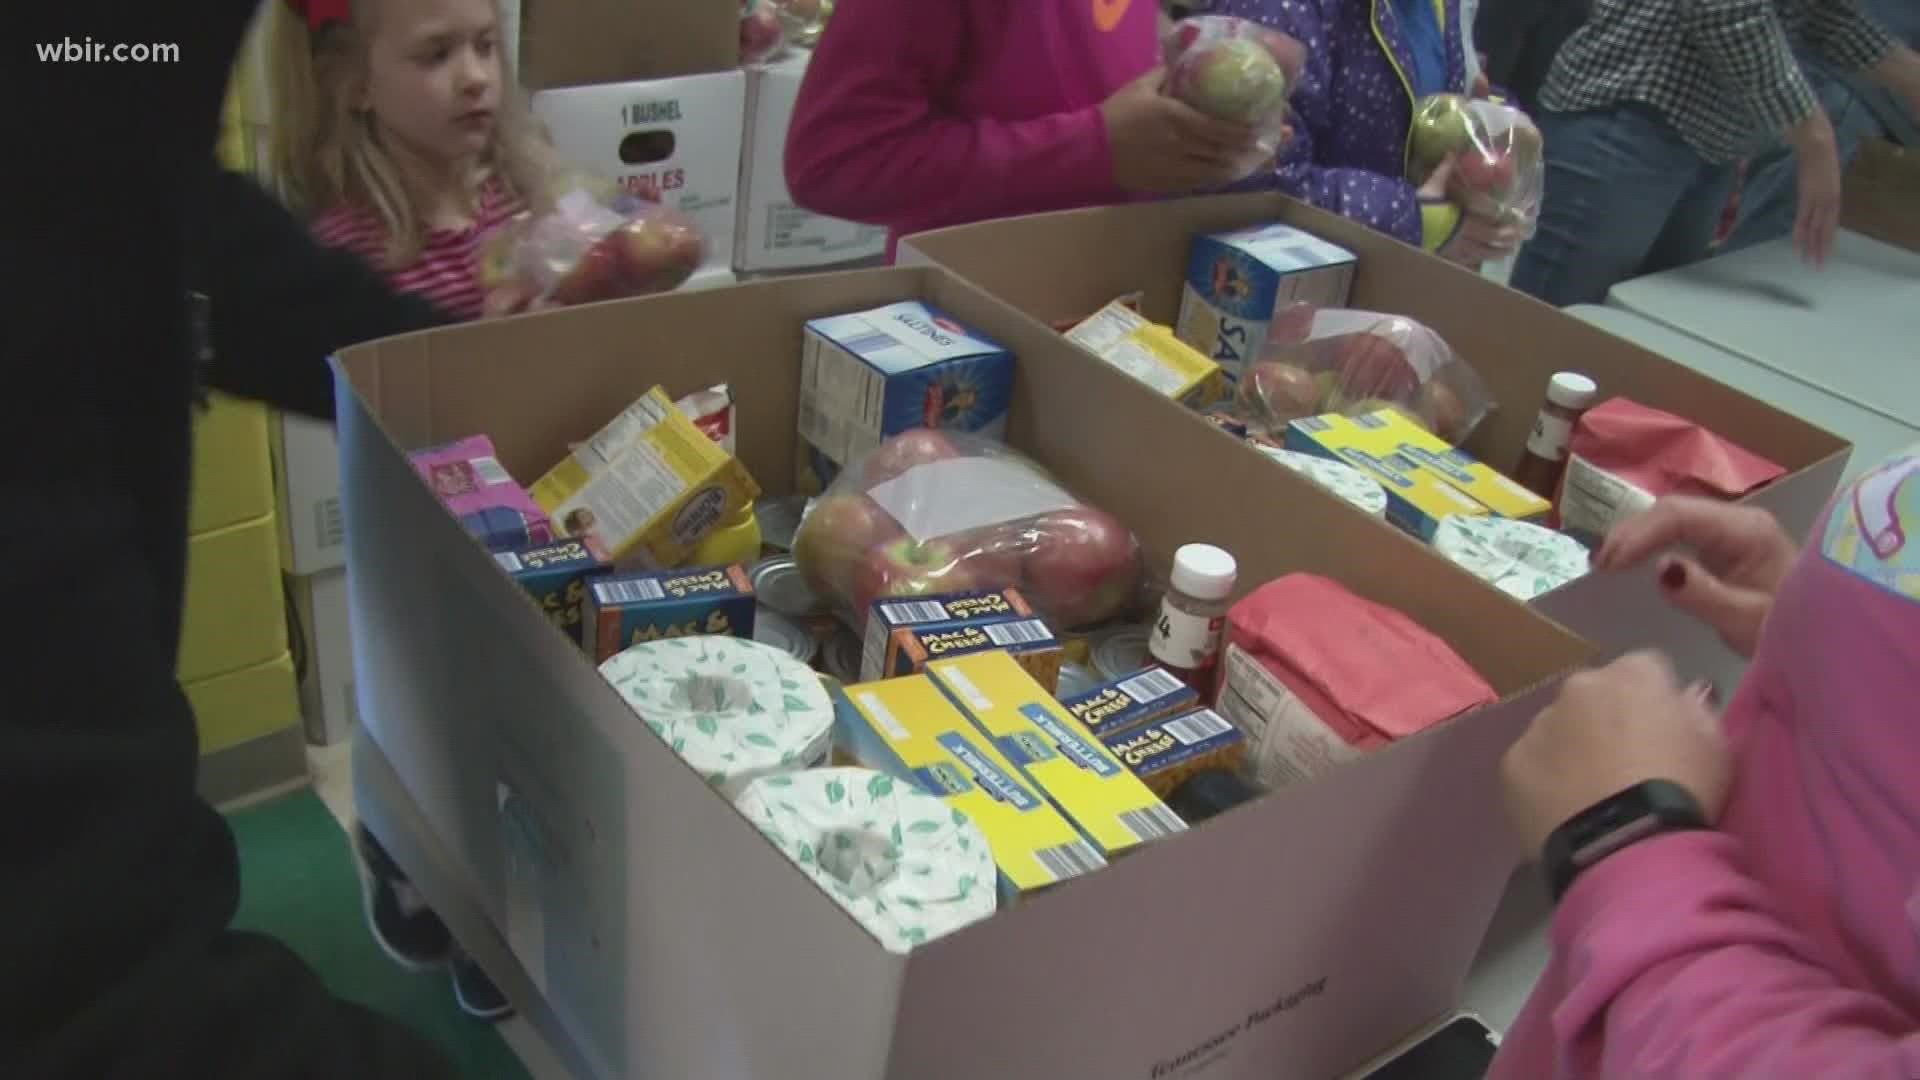 New numbers show last year people donated more than $2 billion dollars on the annual day of giving back.